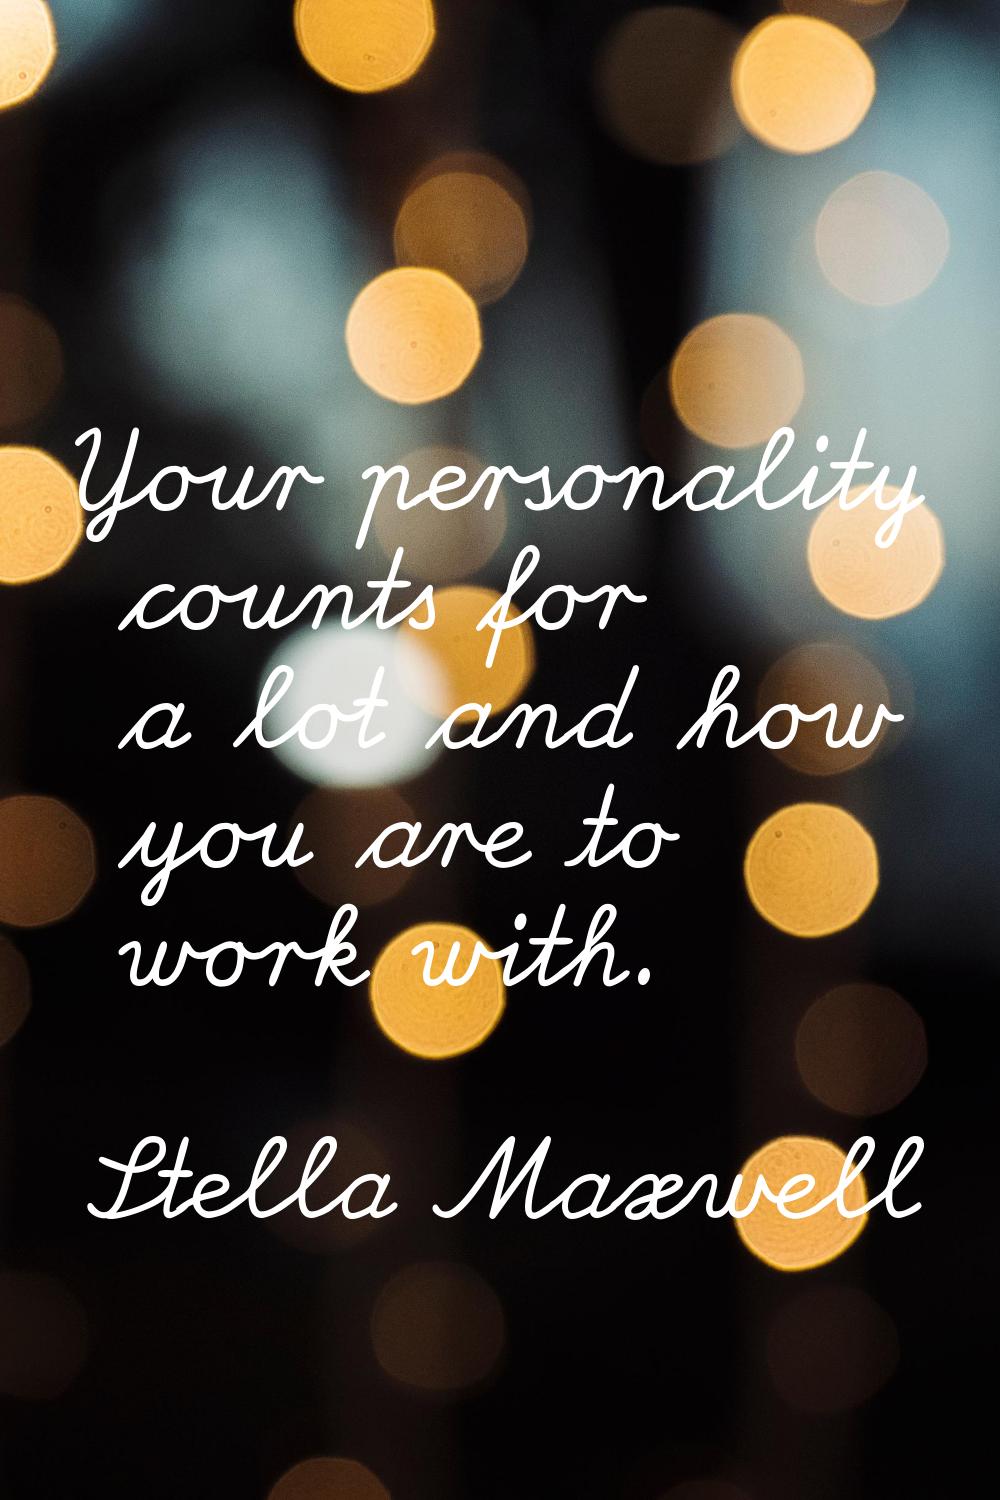 Your personality counts for a lot and how you are to work with.